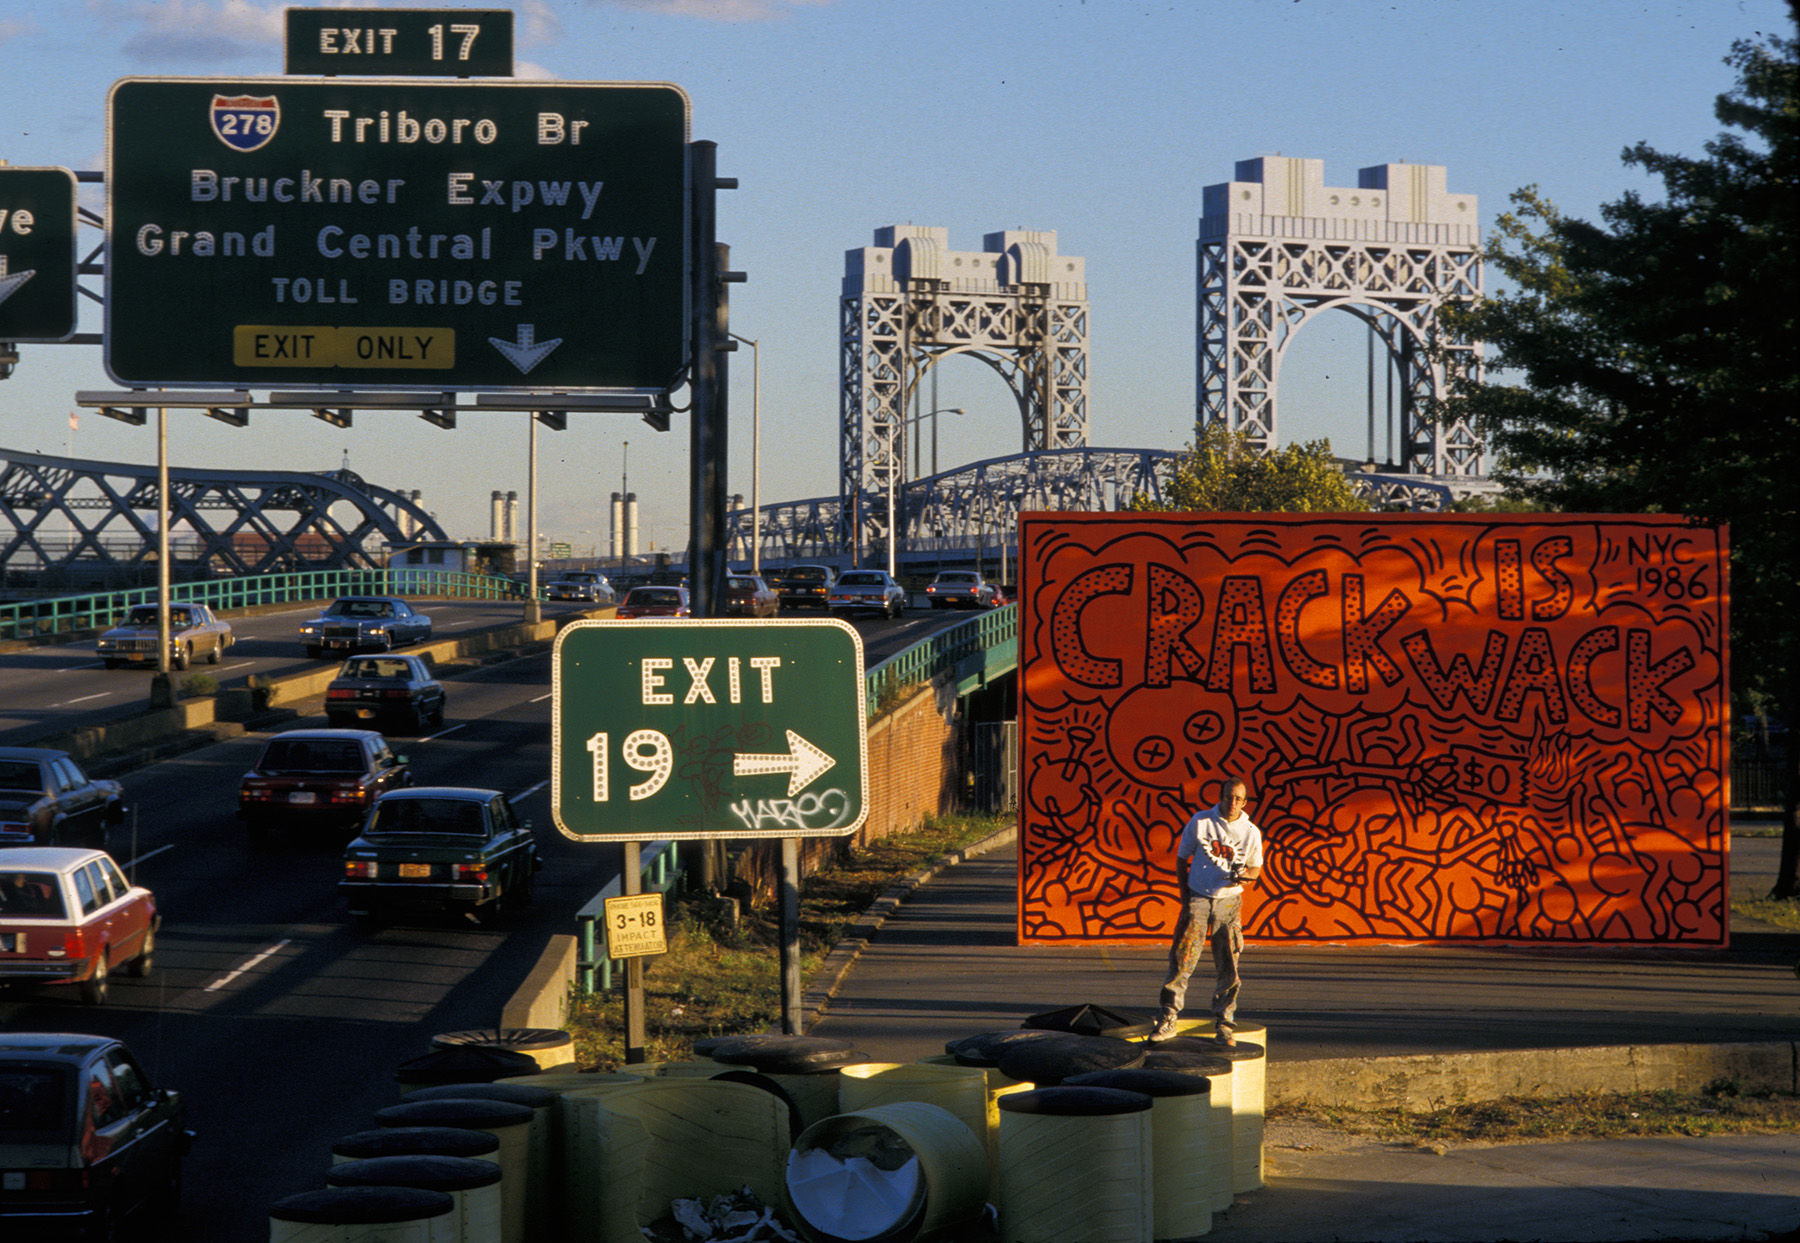 Keith Haring with Crack is Wack mural, October, 1986